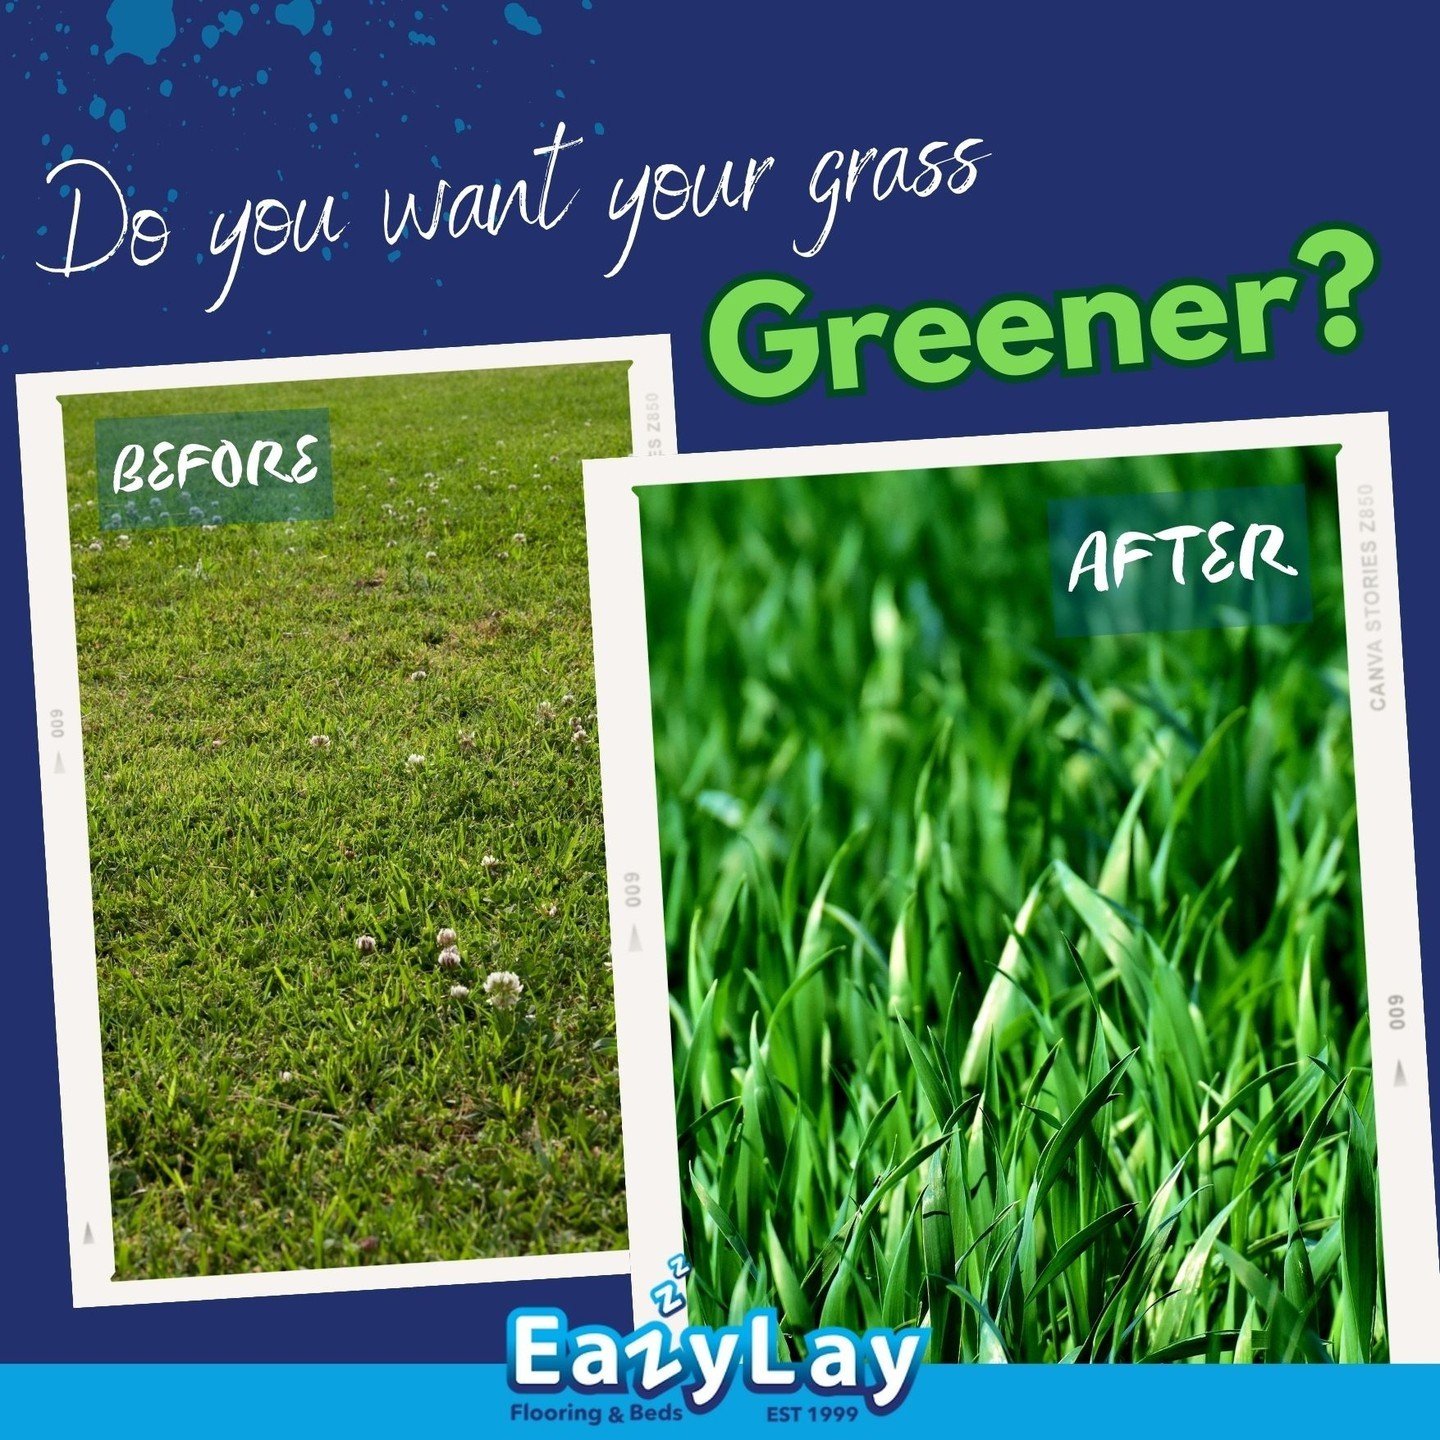 Say goodbye to high-maintenance, patchy lawns! Welcome the clean, lush beauty of artificial grass into your life. Enjoy a hassle-free, picture-perfect lawn all year round. #ArtificialGrass #LowMaintenance #BeautifulLawns